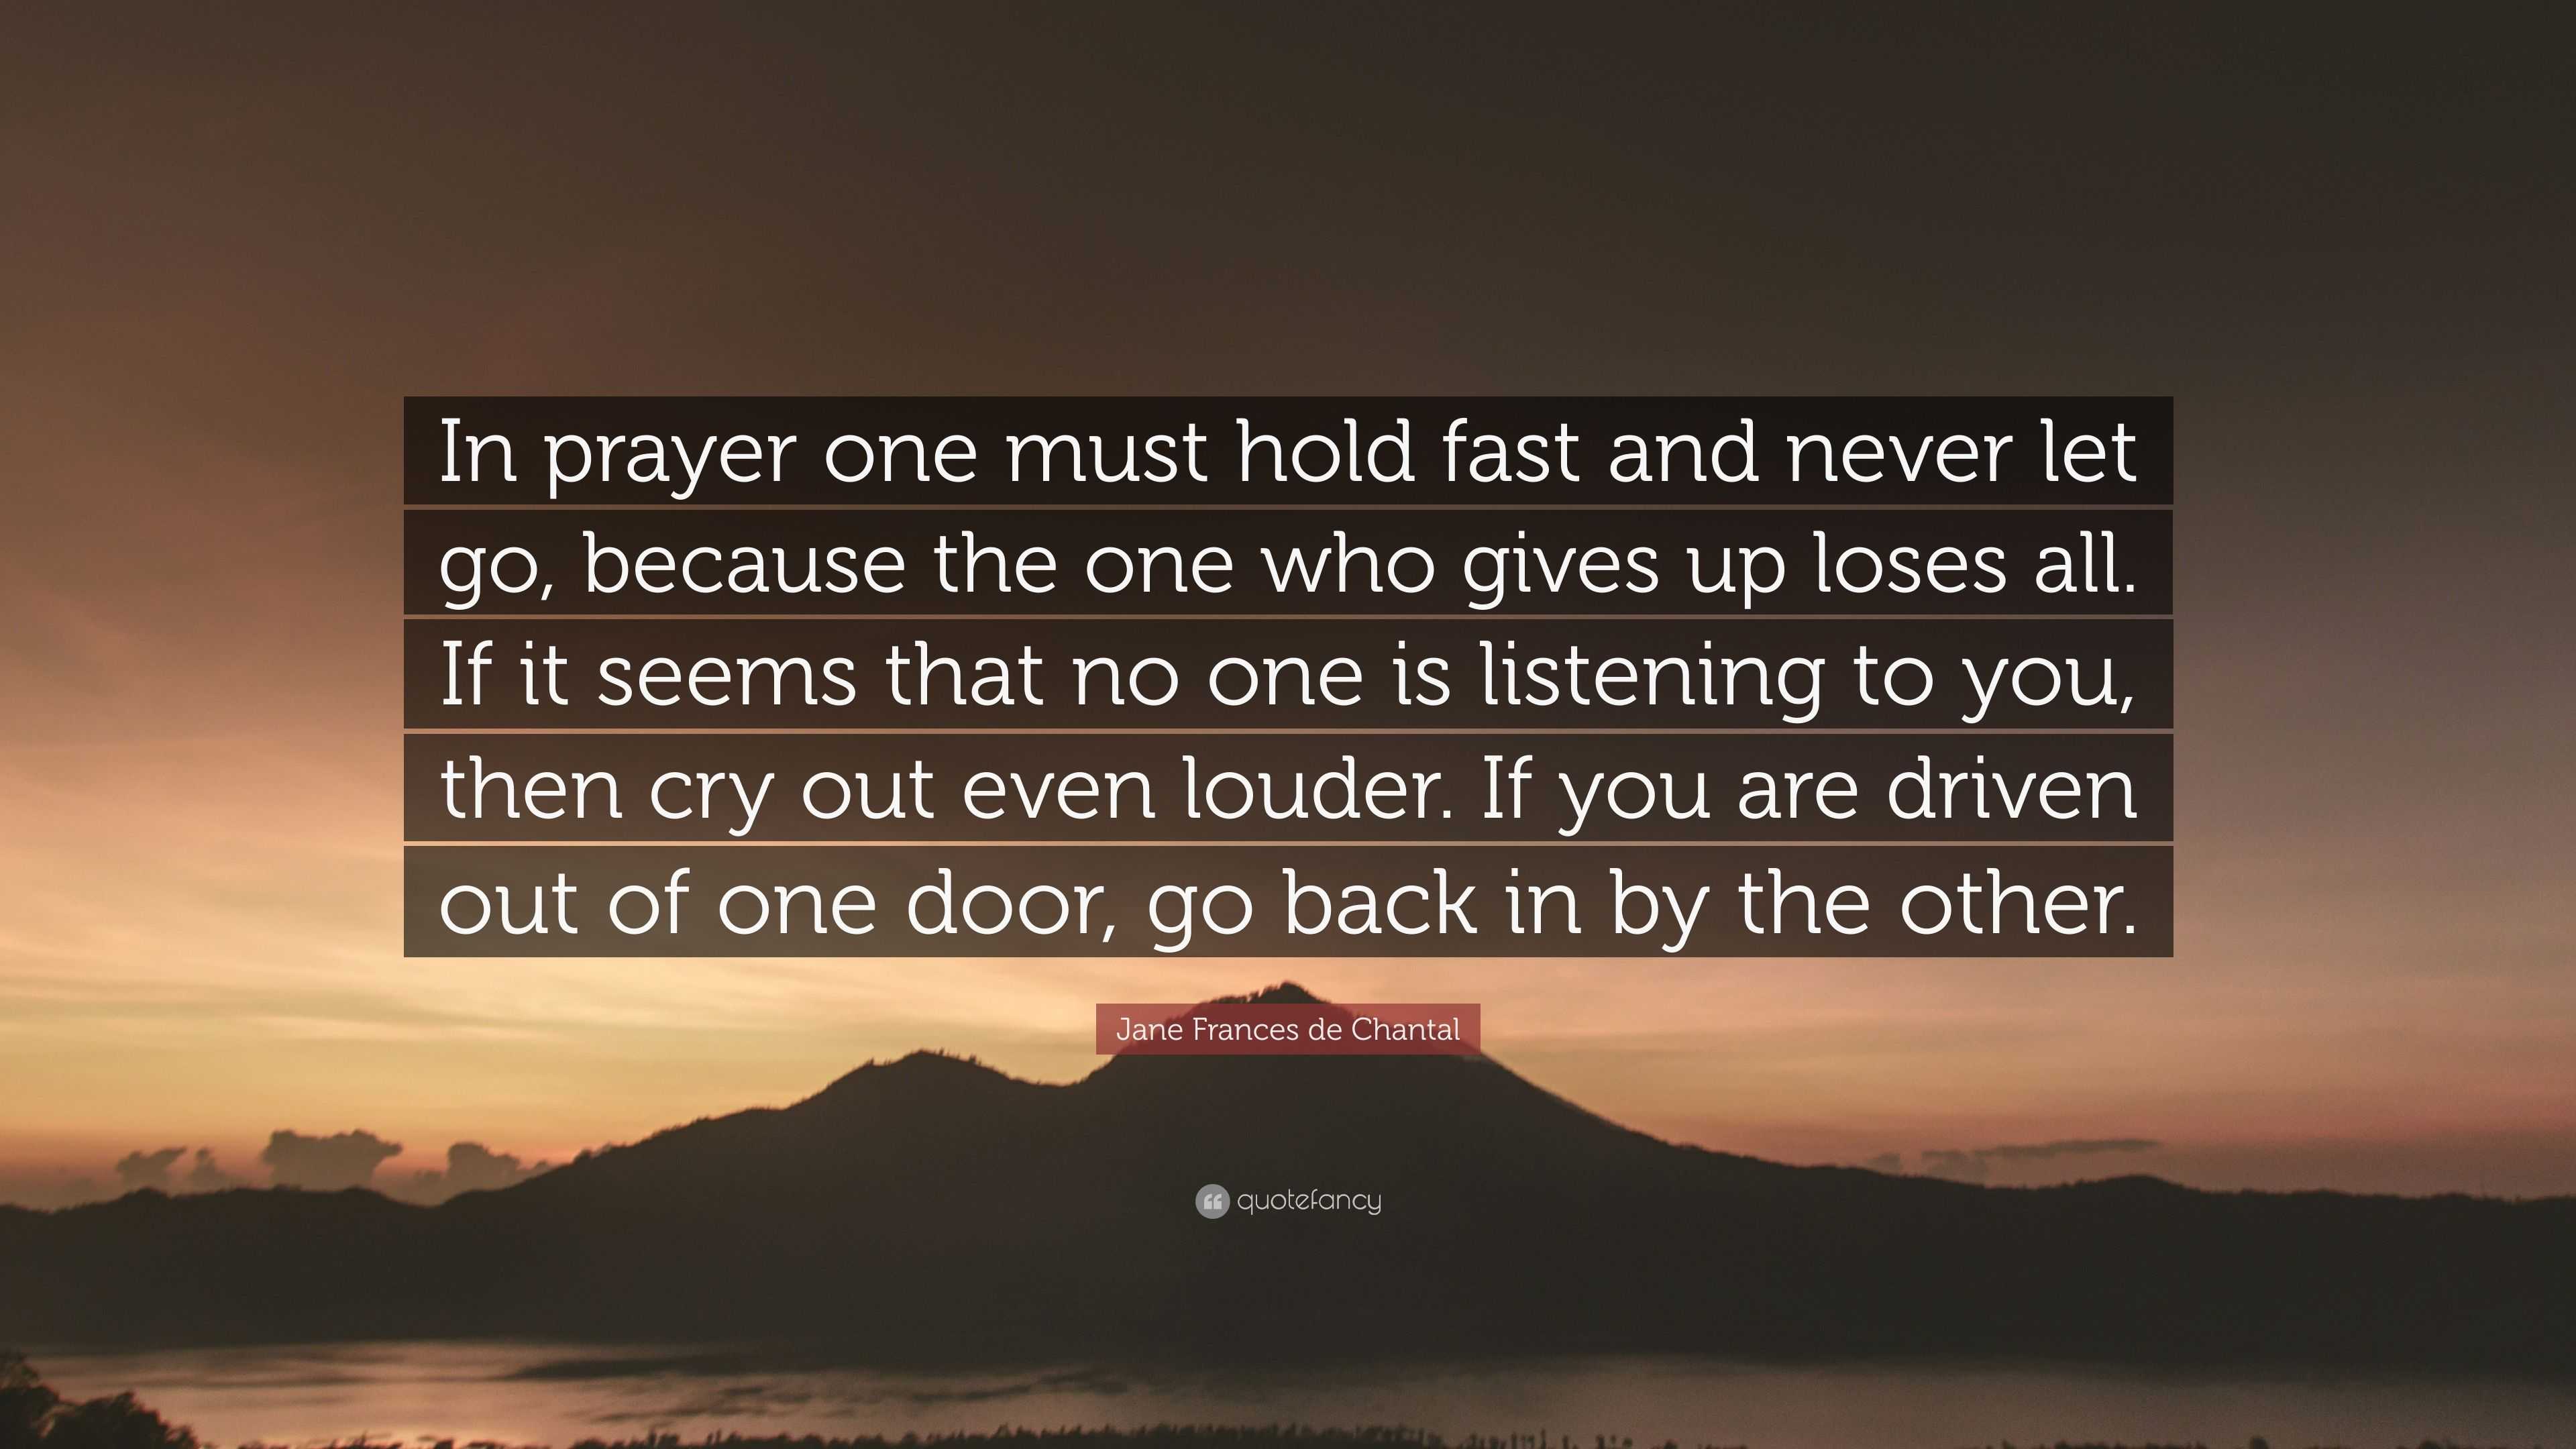 Jane Frances de Chantal Quote “In prayer one must hold fast and never